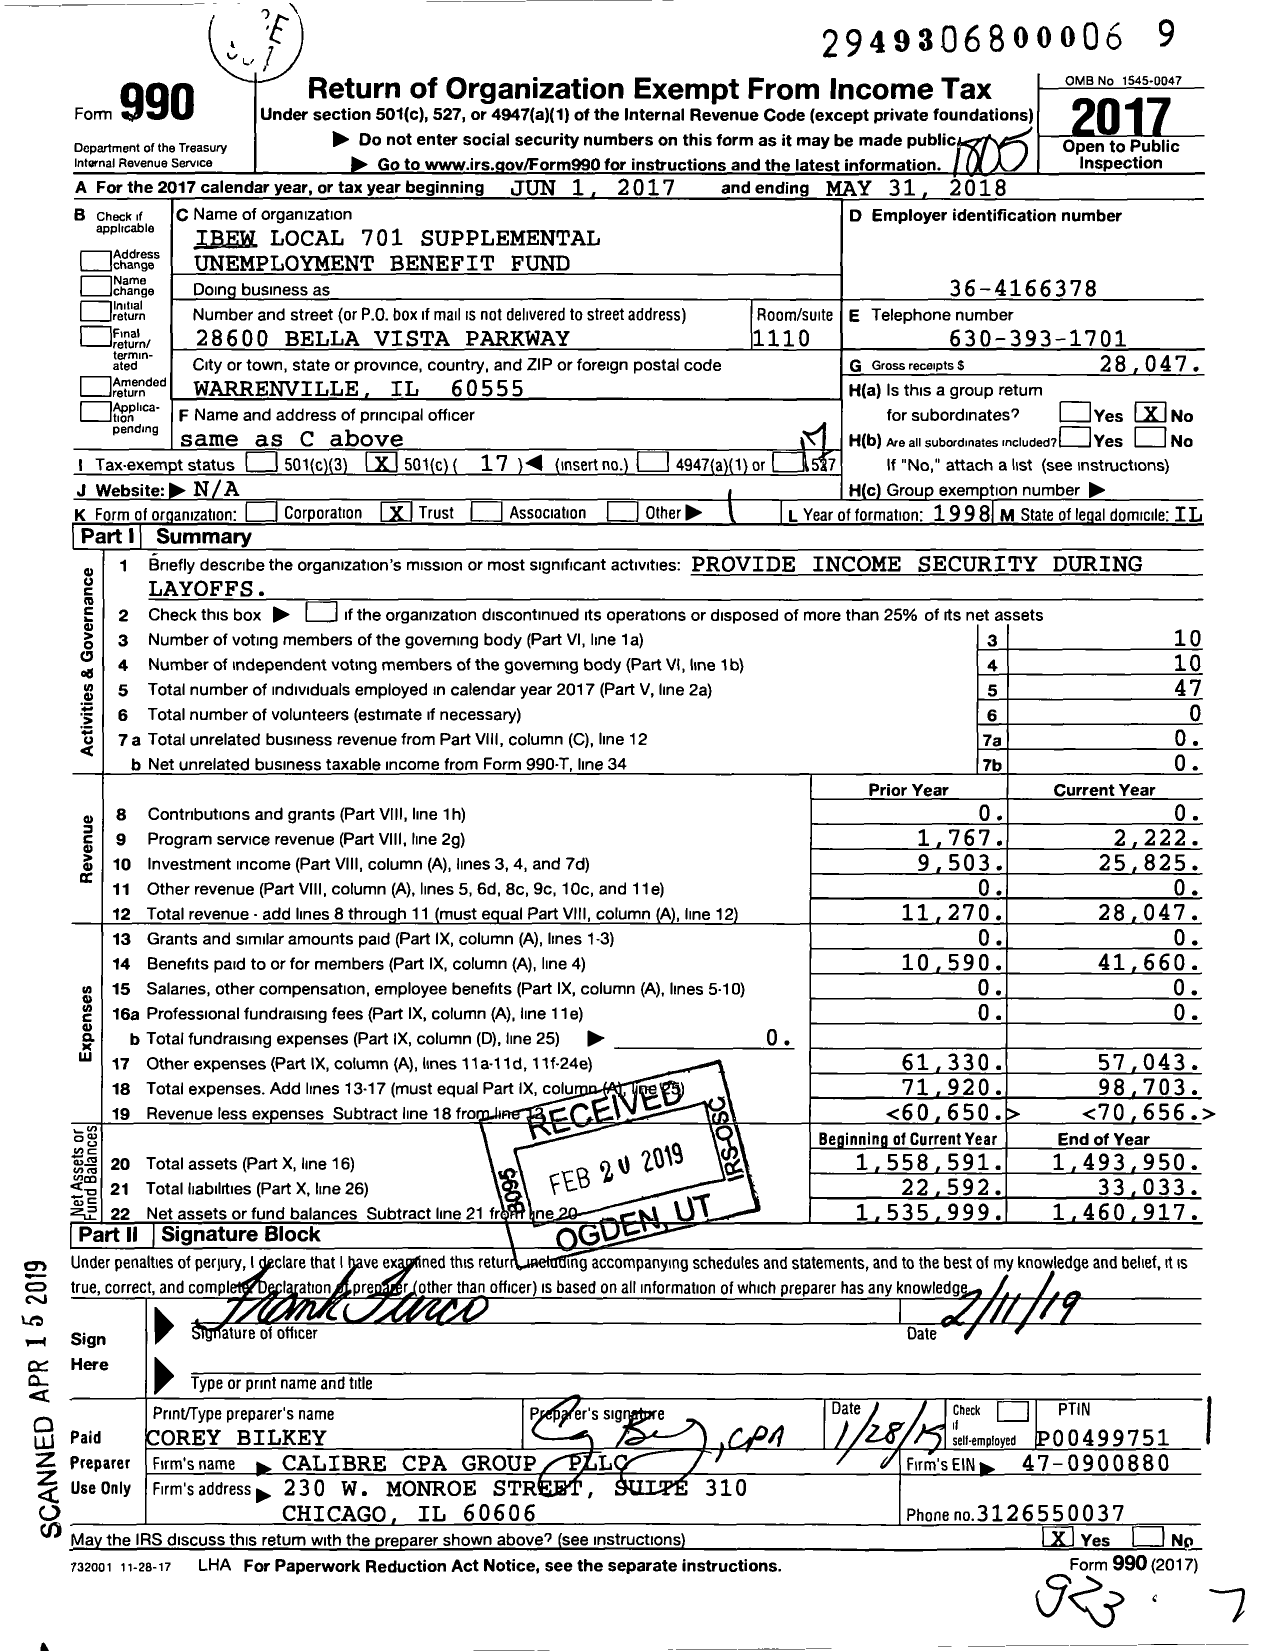 Image of first page of 2017 Form 990O for IBEW Local 701 Supplemental Unemployment Benefit Fund